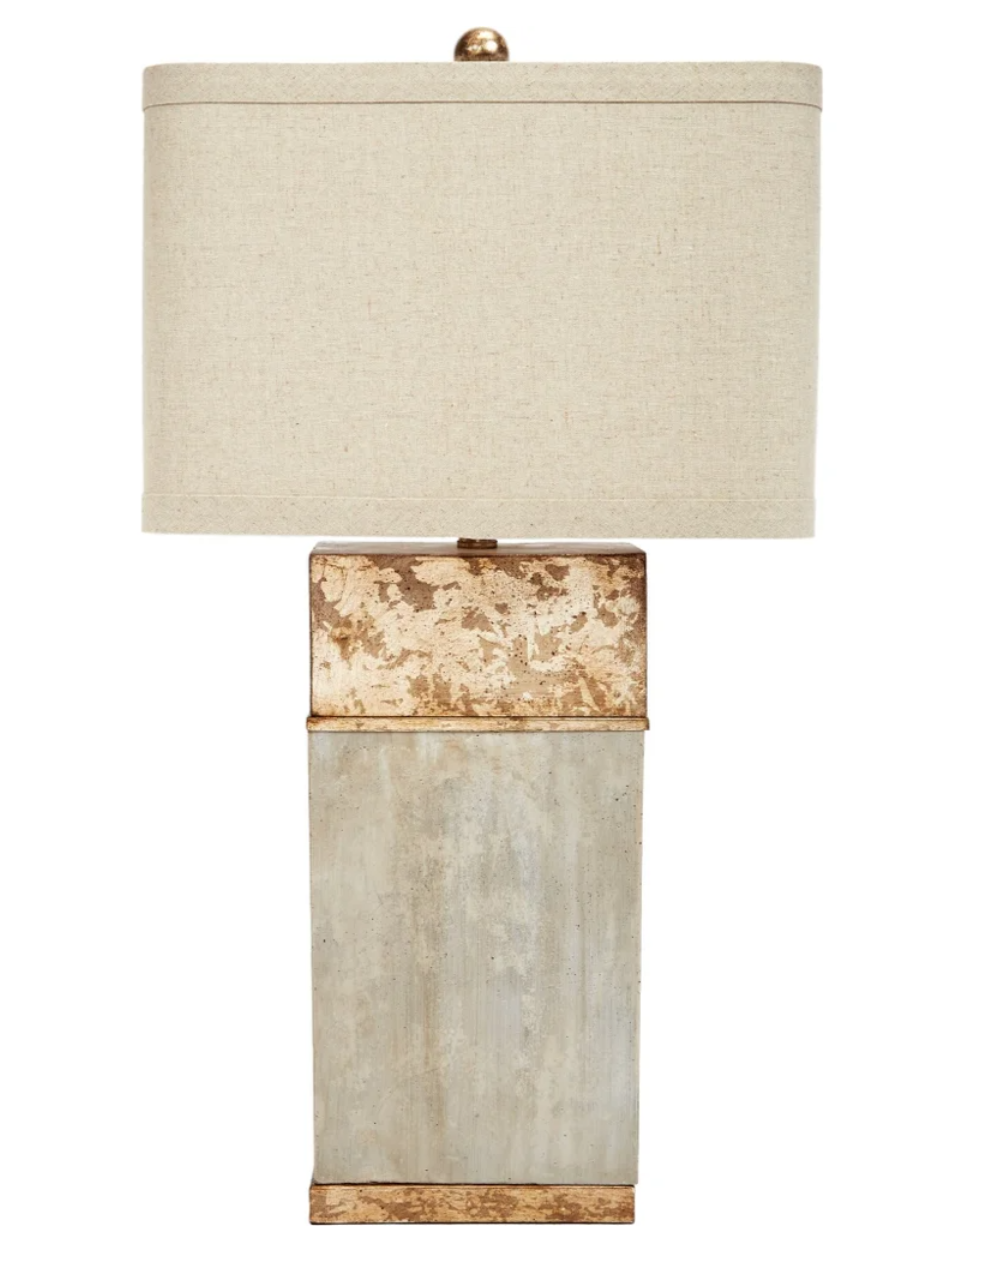 ALAN CEMENT TABLE LAMP